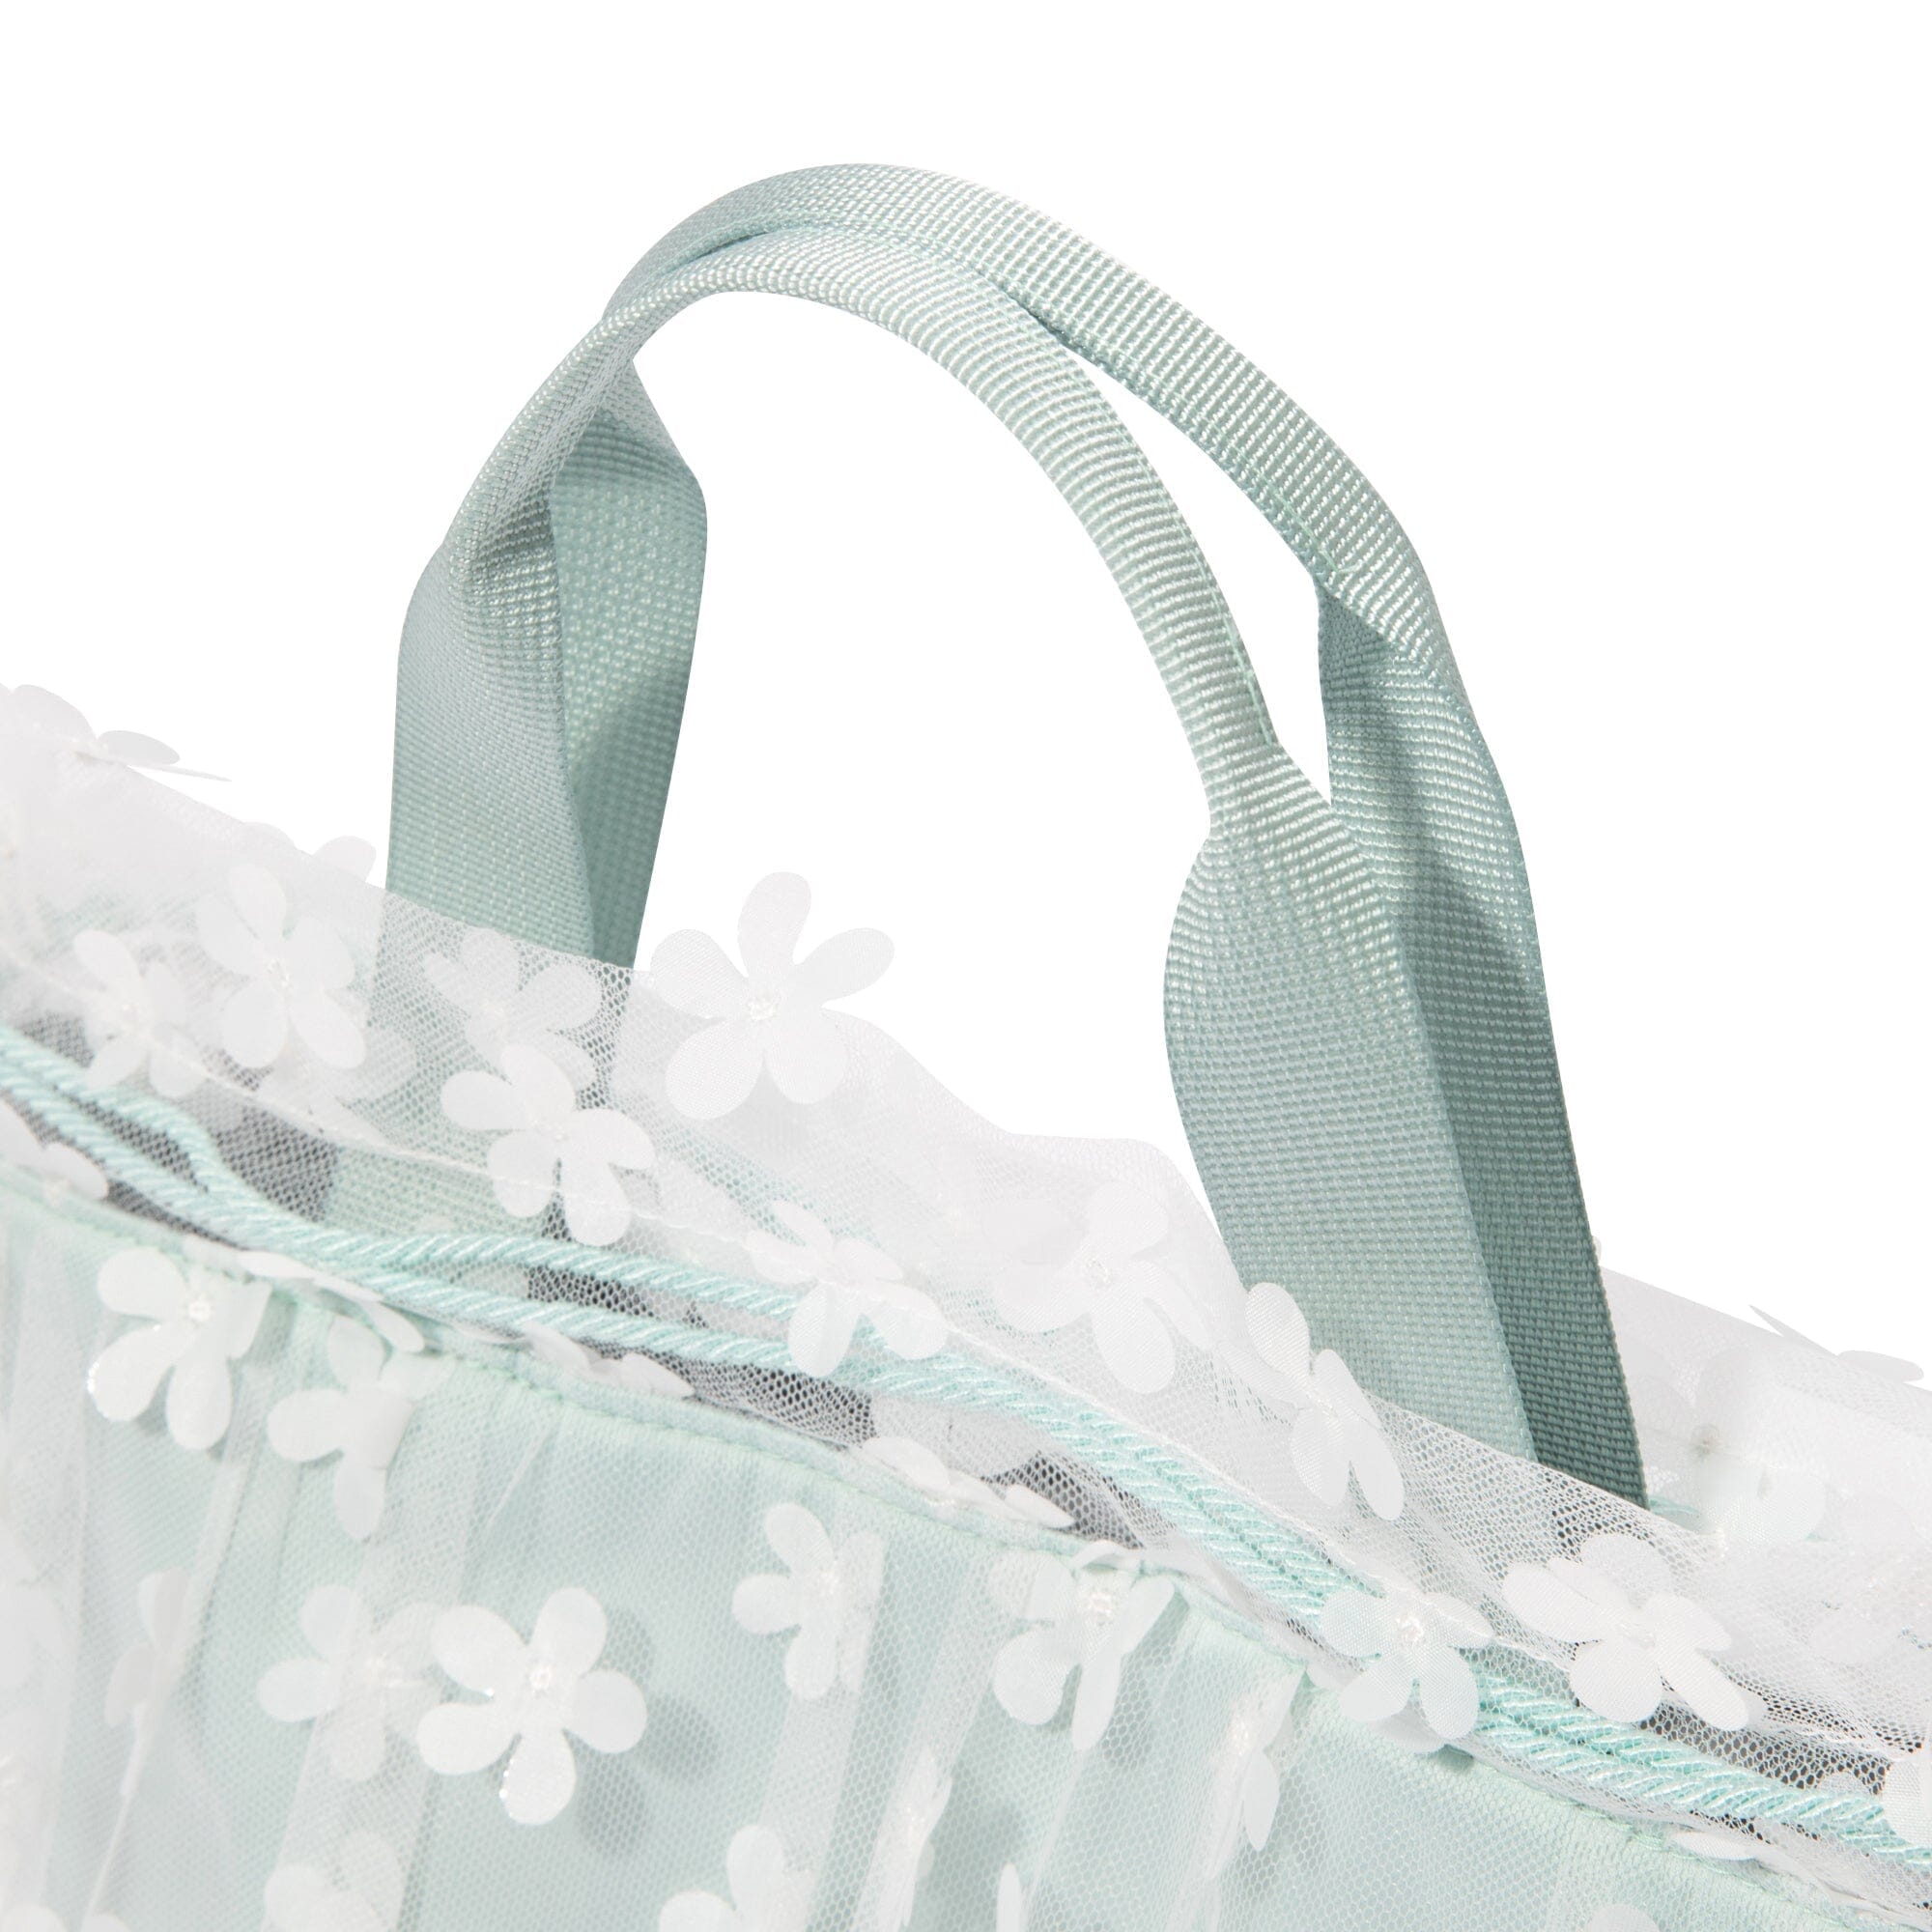 Tulle Lunch Bag  Mint